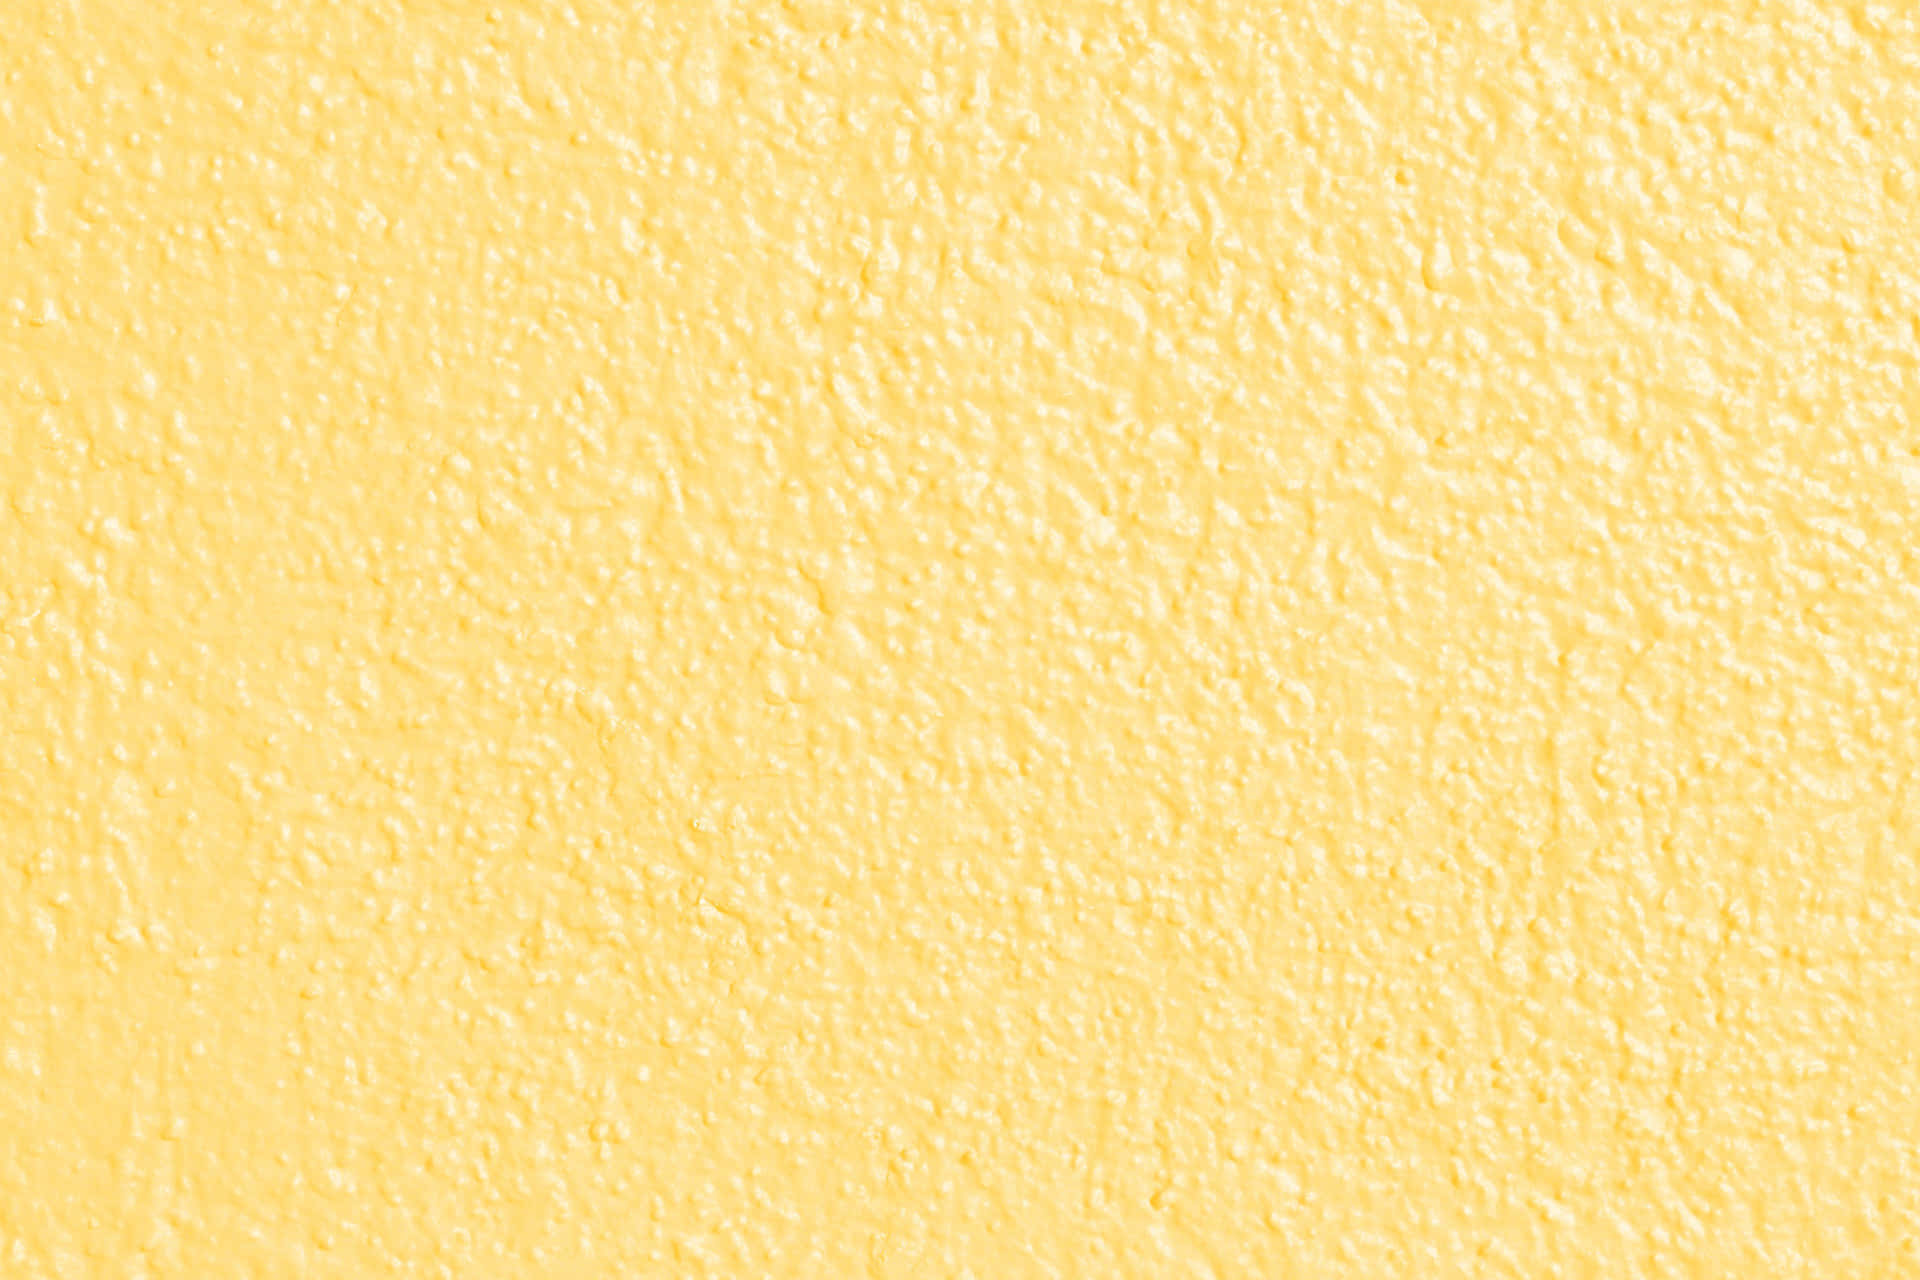 Brighten your day with a light yellow background